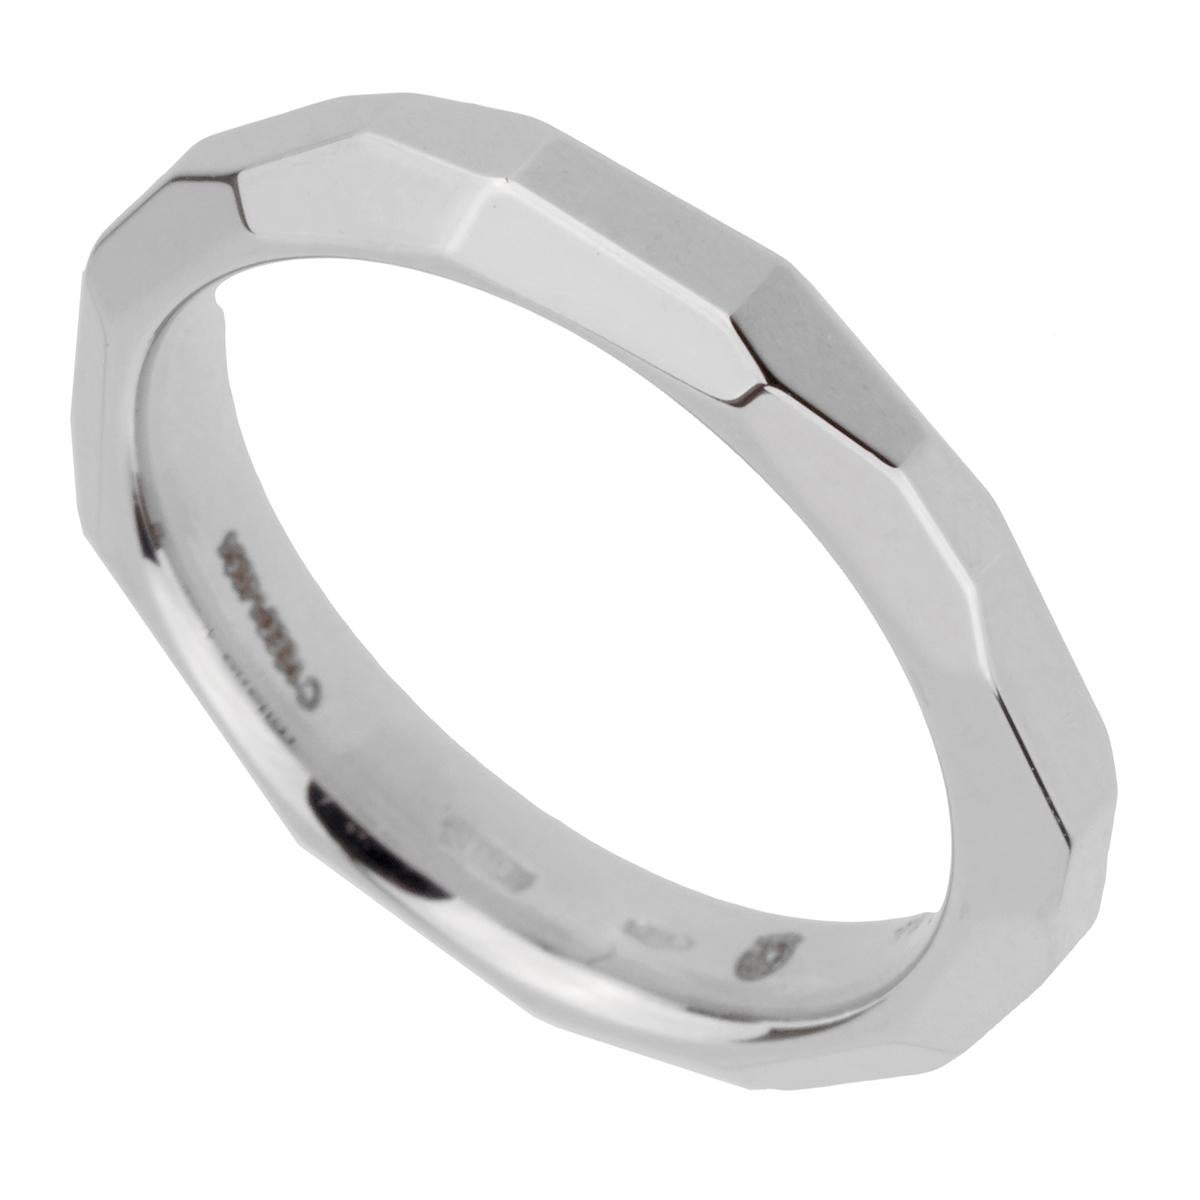 A chic white gold Pomellato band style ring crafted in 18k white gold, The ring measures a size 6.25 and can be resized.

Sku: 2377